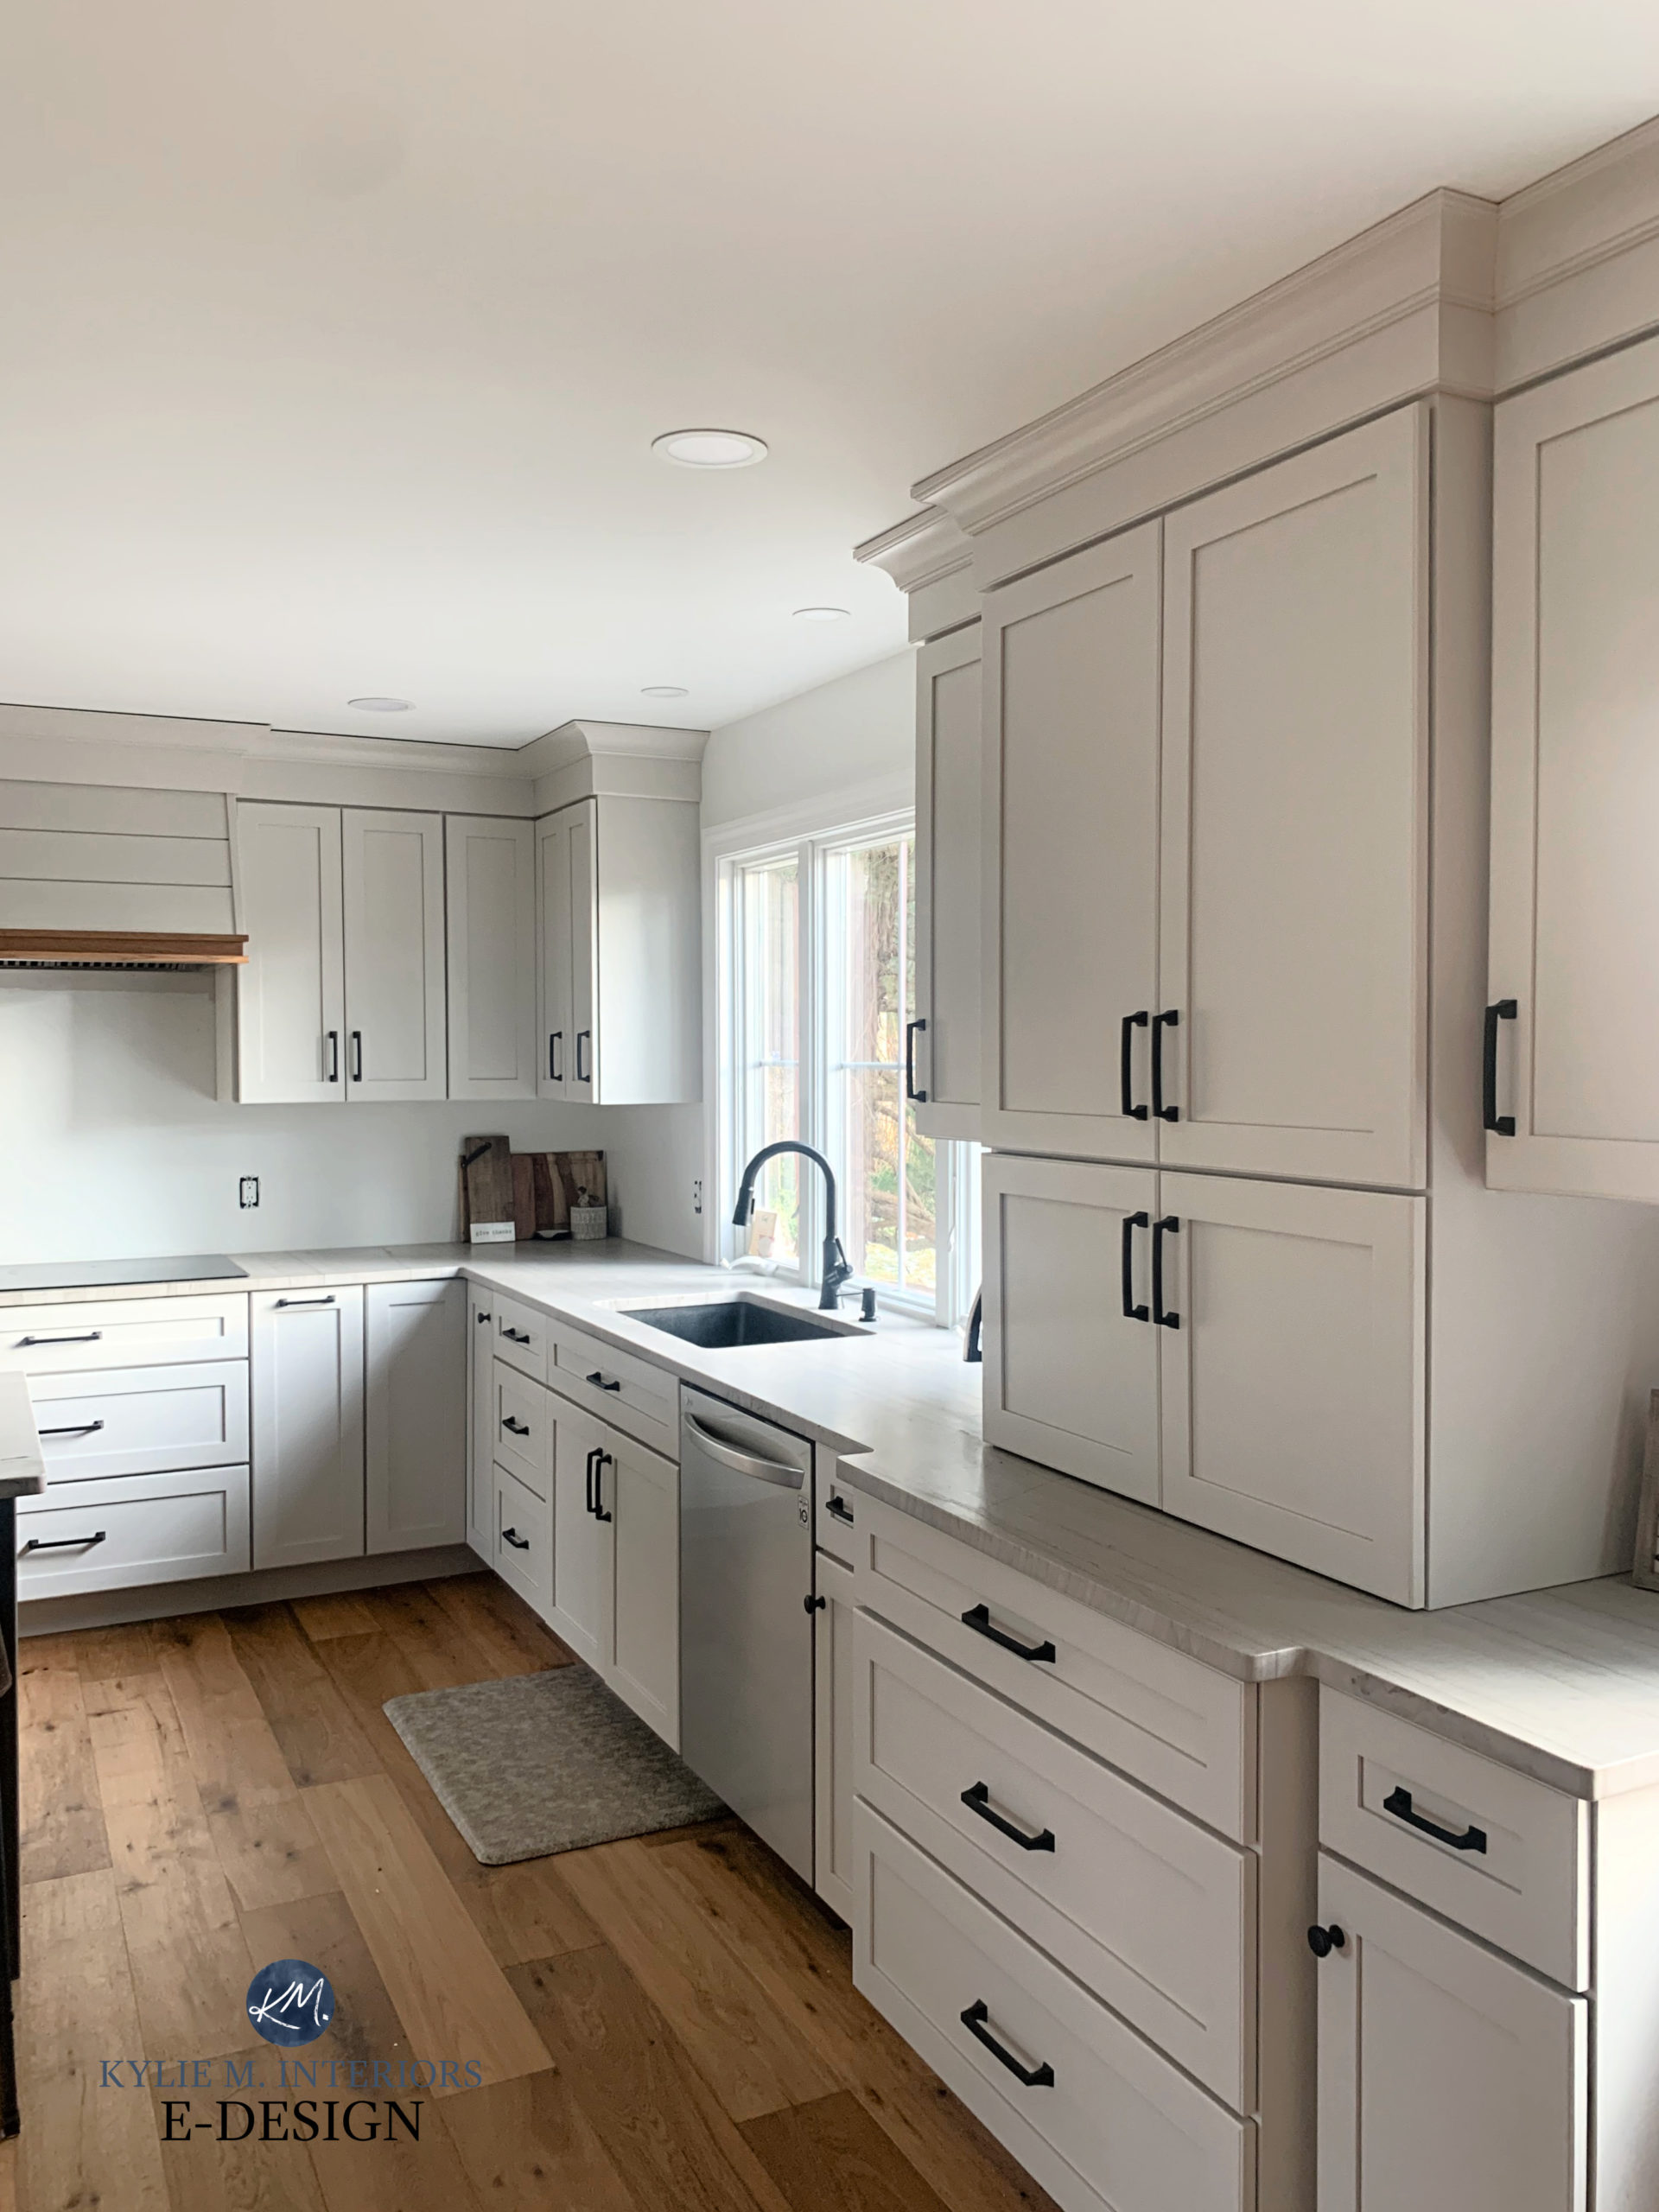 Sherwin Williams Agreeable Gray greige taupe off white painted cabinets, White Macaubus quartzite countertops, wood floor. Black hardware. Kylie M Interiors Edesign